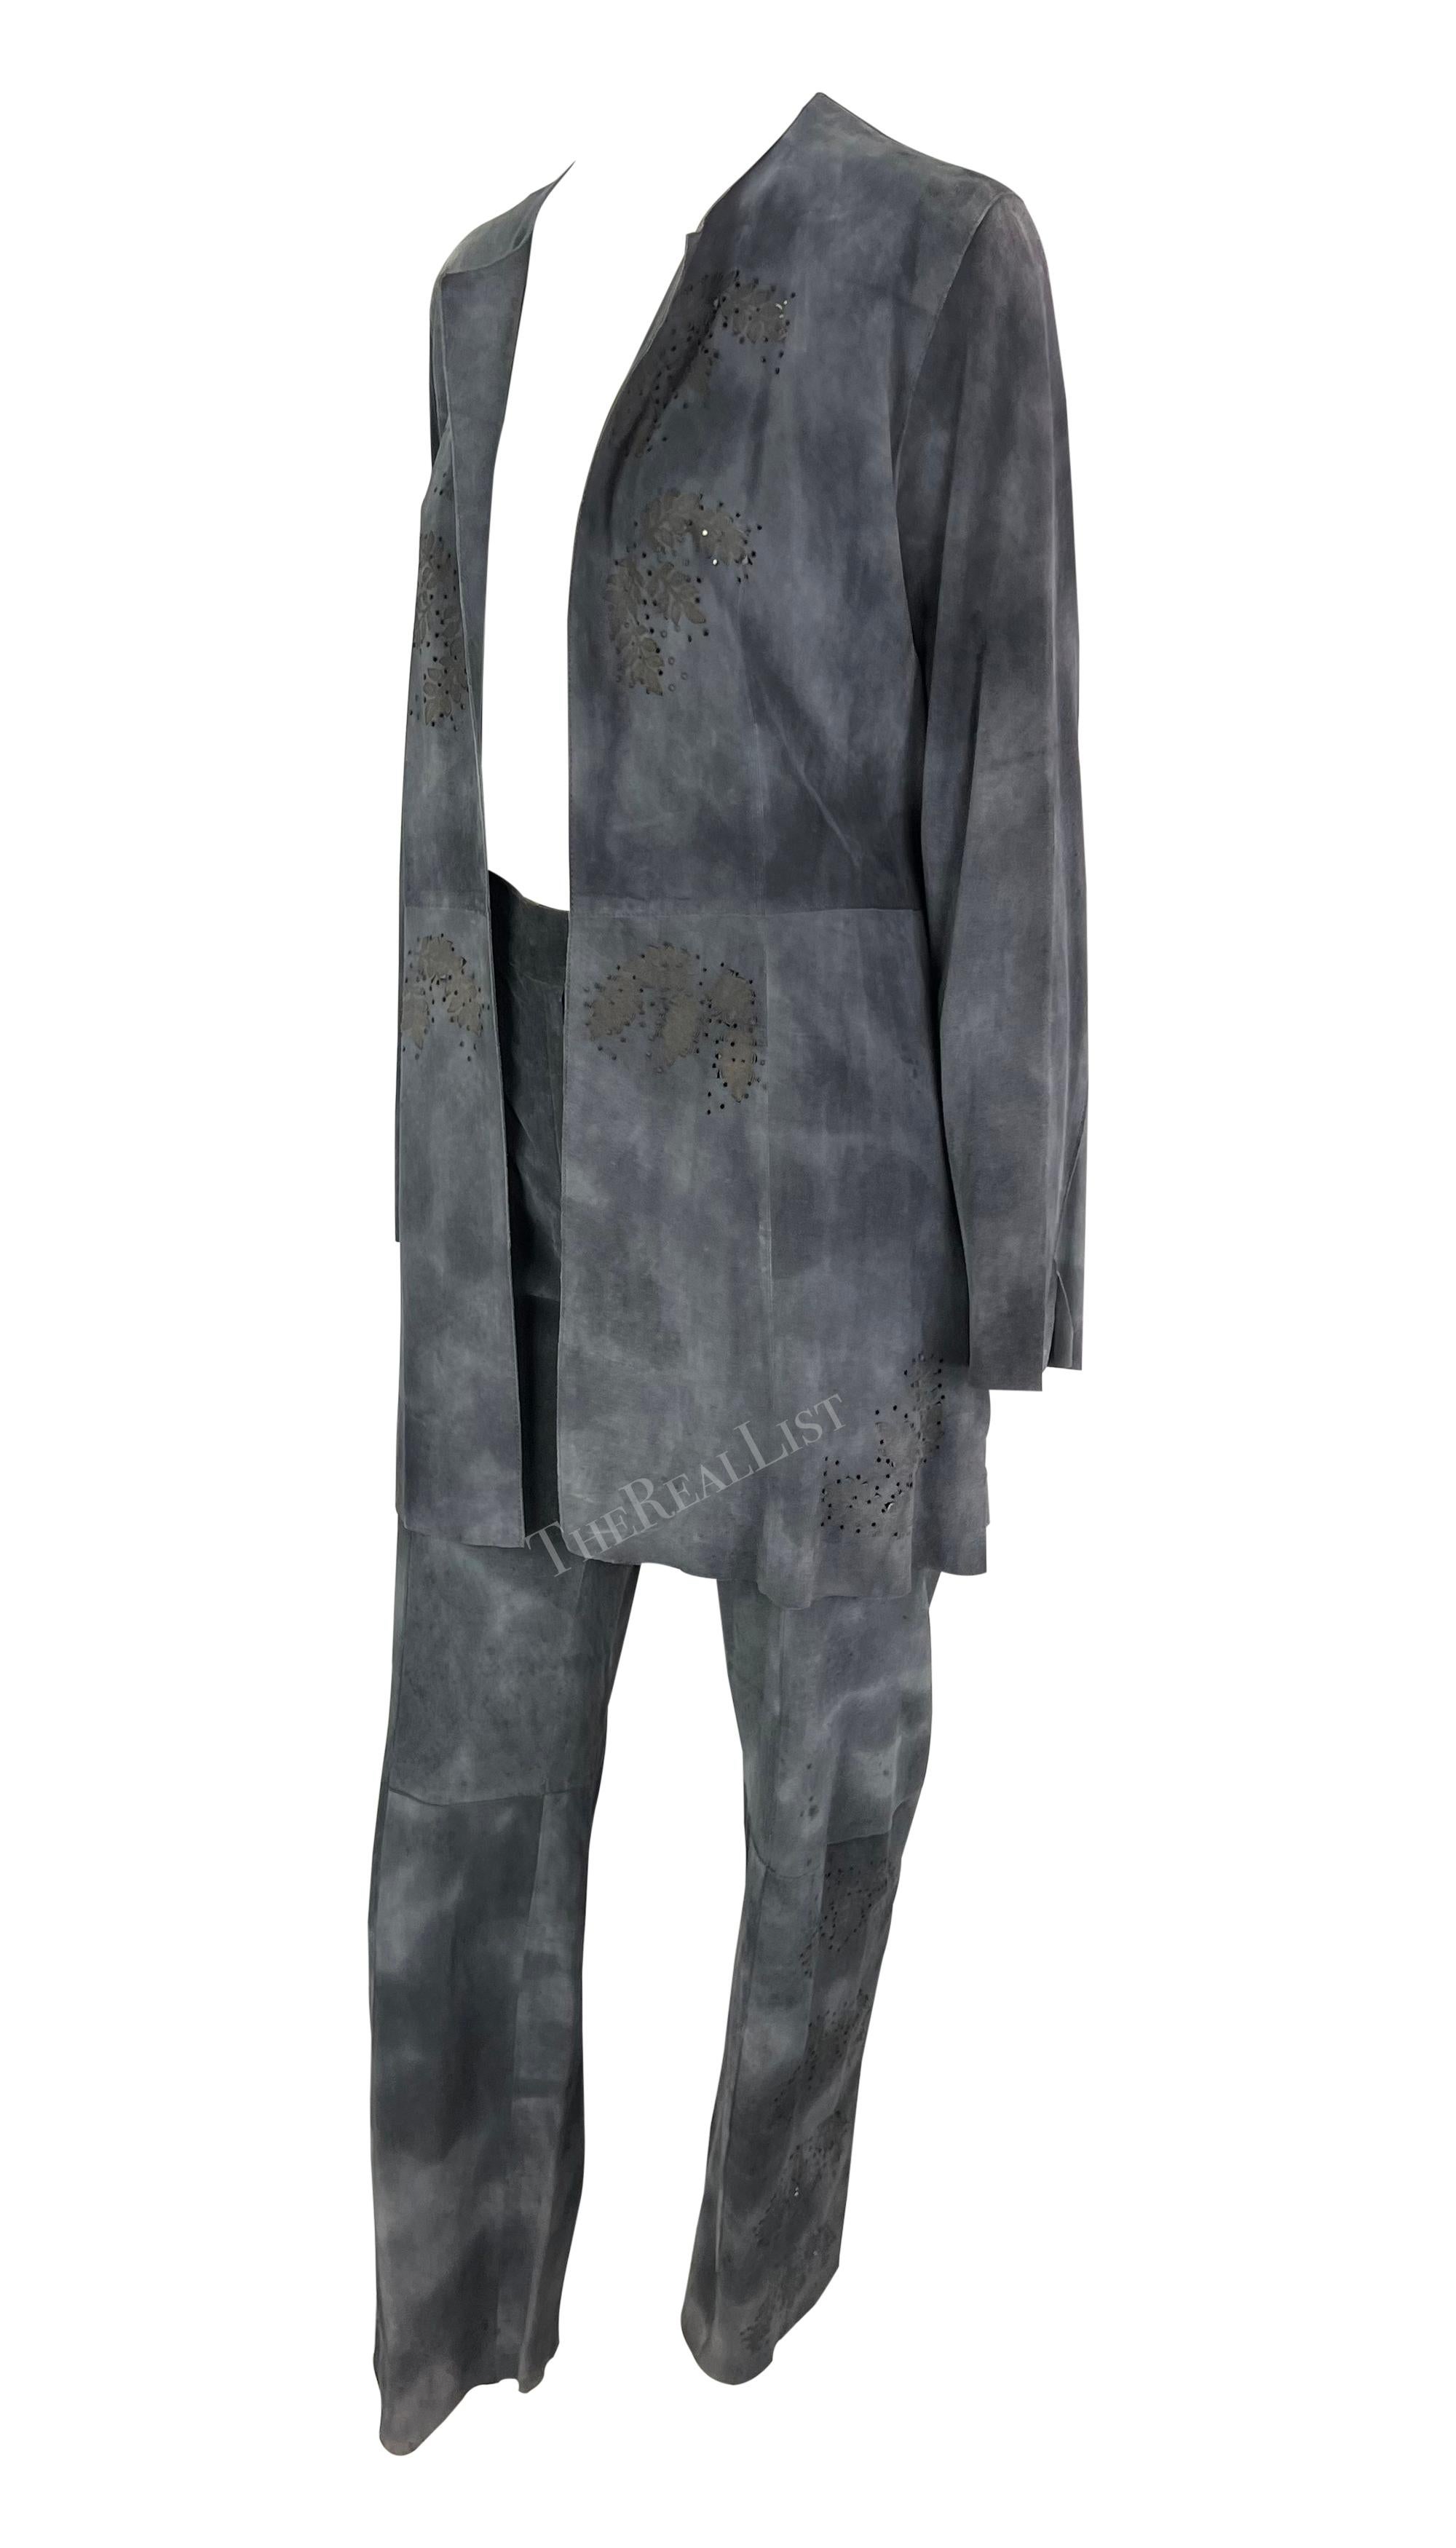 Presenting a chic blue-grey Fendi suede pant set, designed by Karl Lagerfeld. From the late 1990s, this set is constructed of a pair of flare pants and an open jacket, both constructed of intentionally distressed suede with a tie-dye-like pattern.